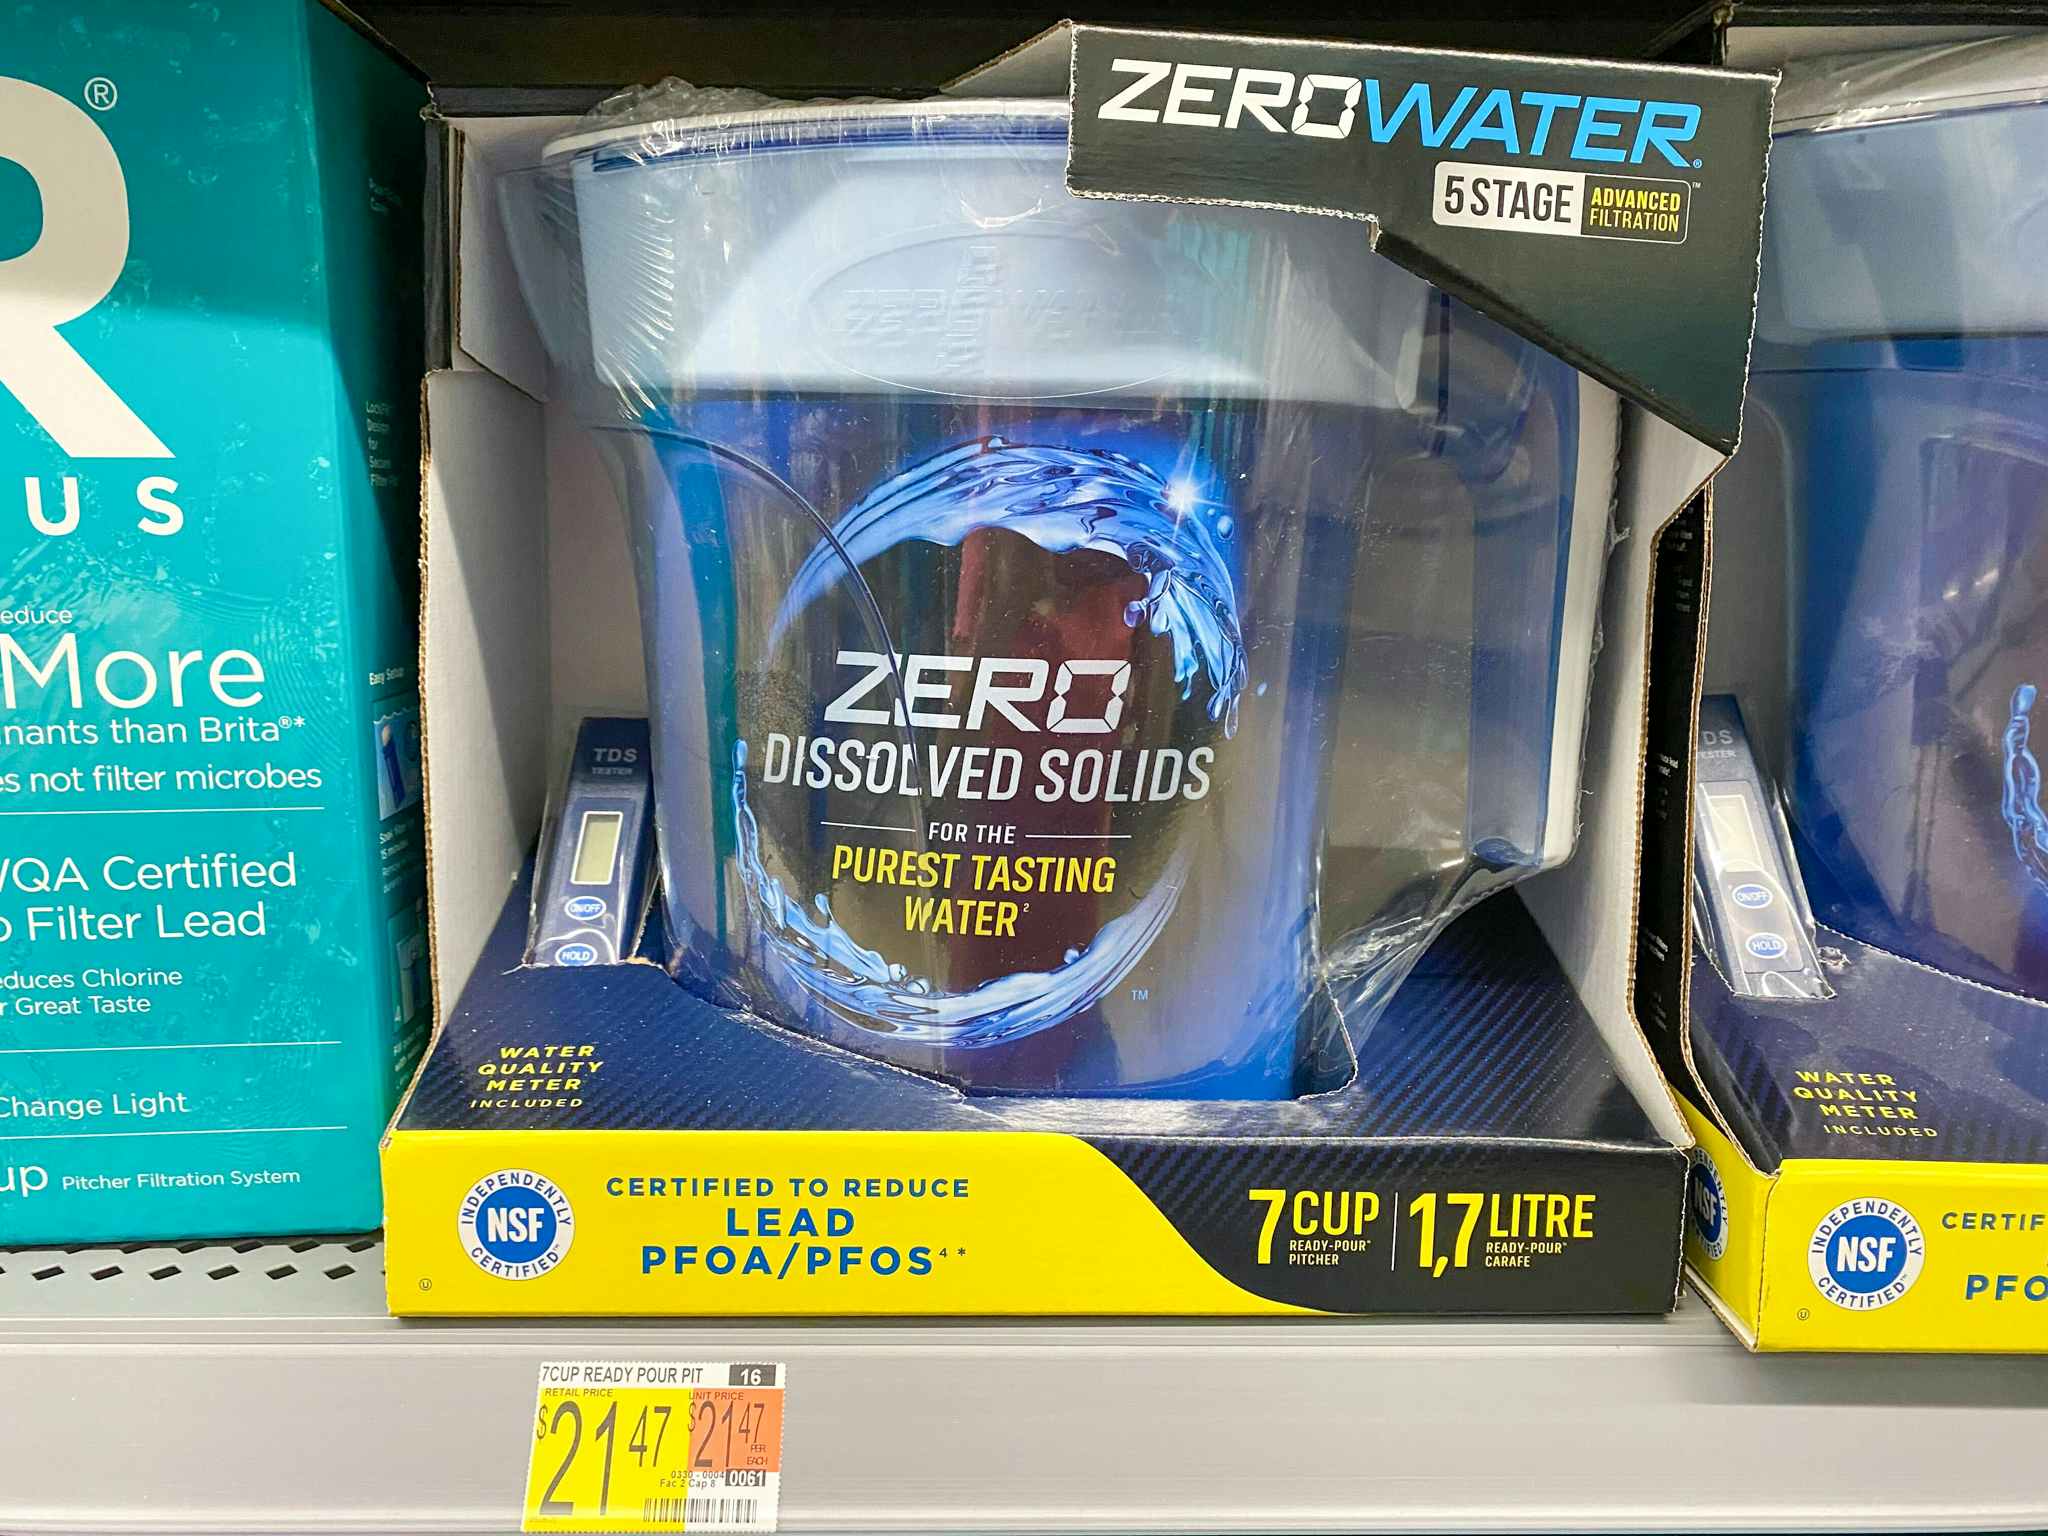 ZeroWater Pitcher on shelf at Walmart. Price tag indicates that the regular price is $21.47.